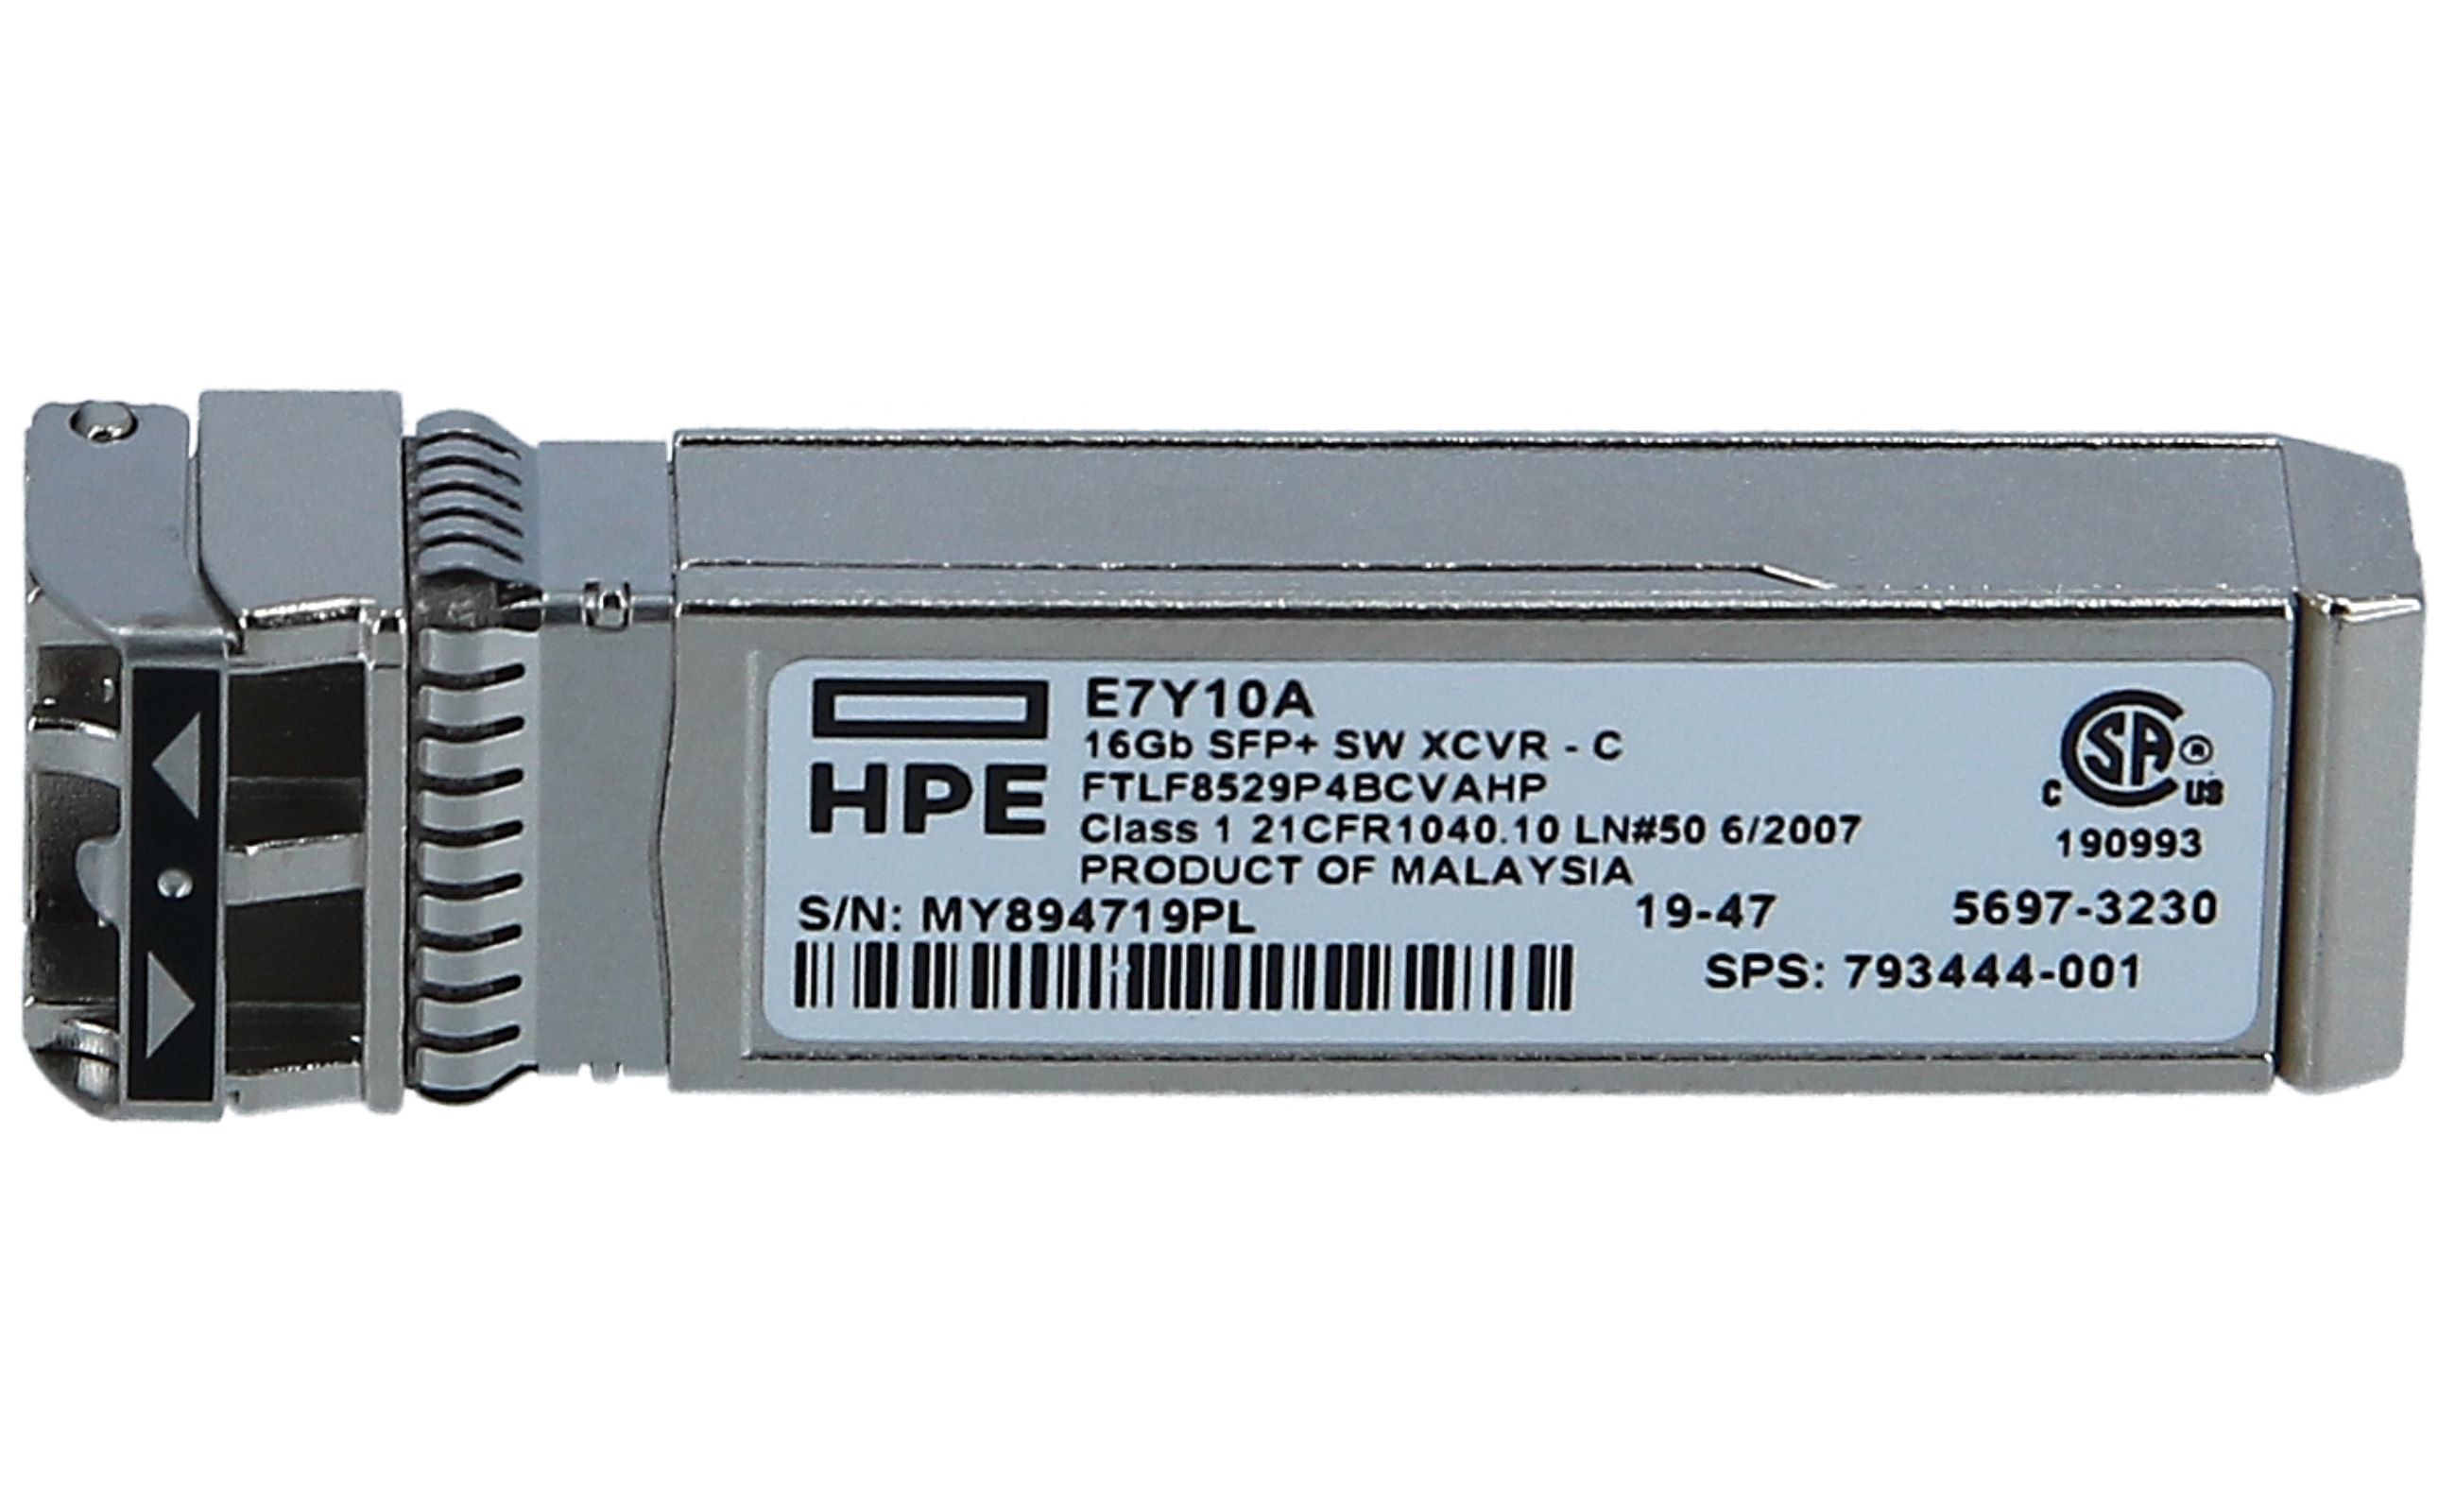 HP E7Y10A 16GB SFP+ SW 1-PACK C TEMP XCV new and refurbished buy online  low prices